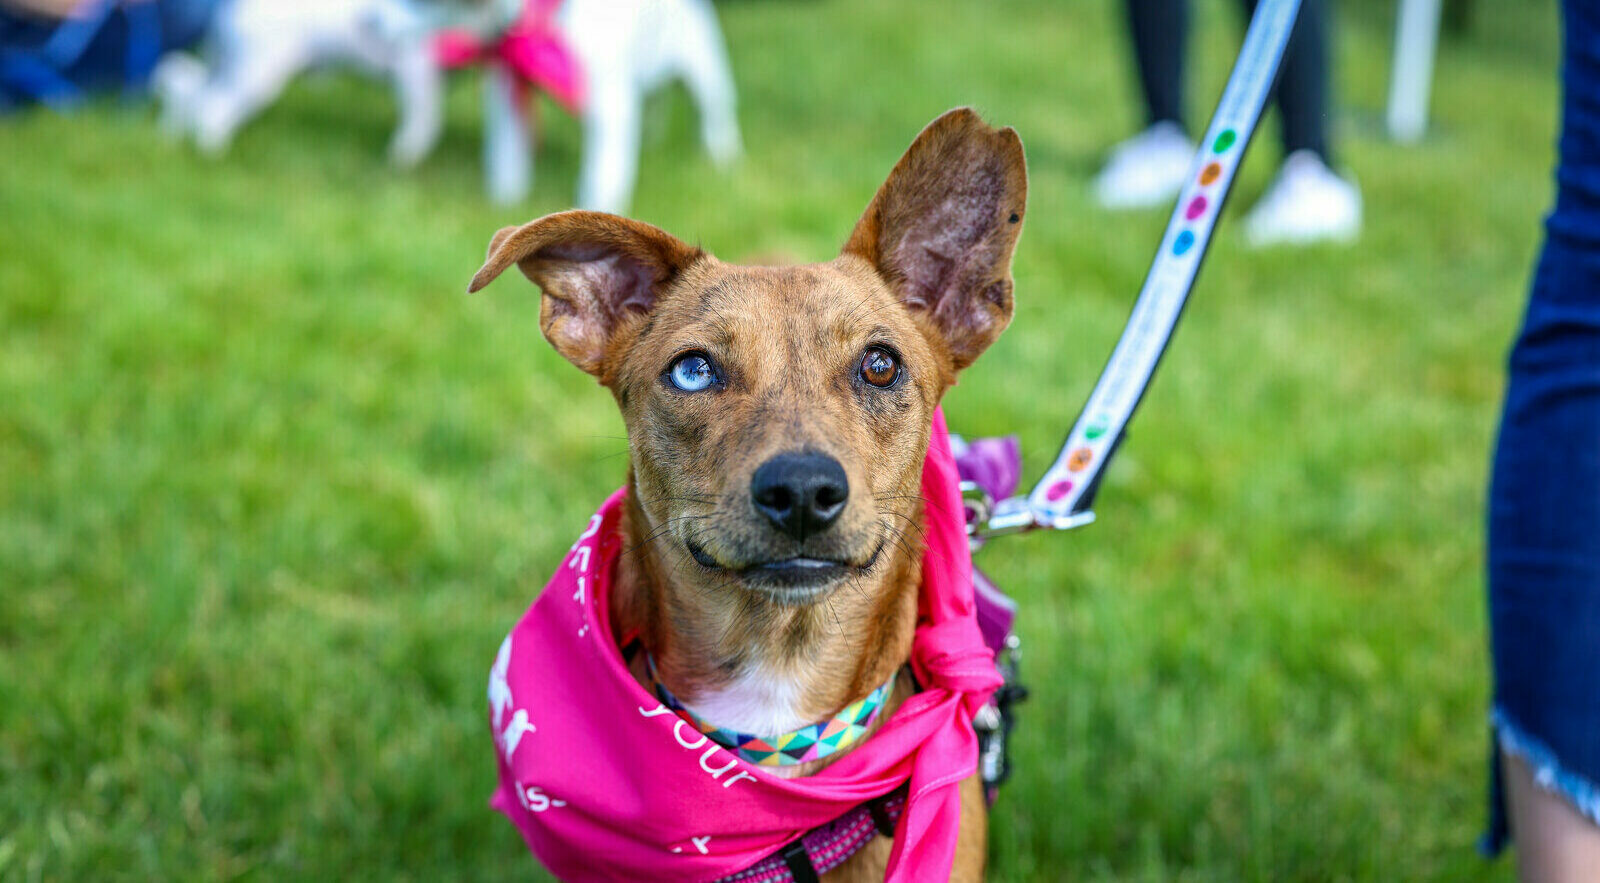 dog in grass with pink bandana